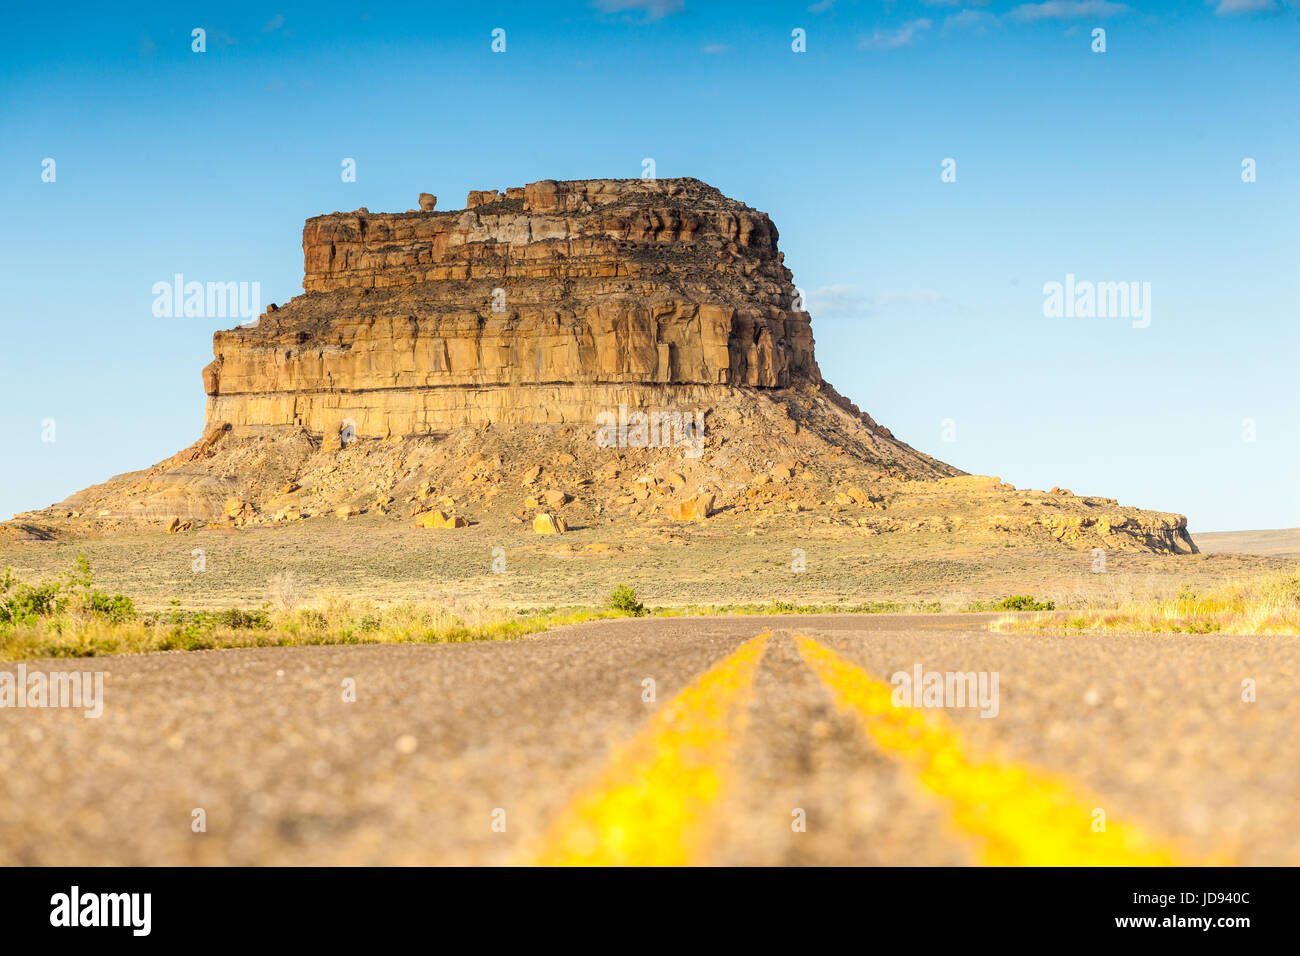 Fajada Butte in chaco Culture National Historical Park, New Jersey, USA Stockfoto